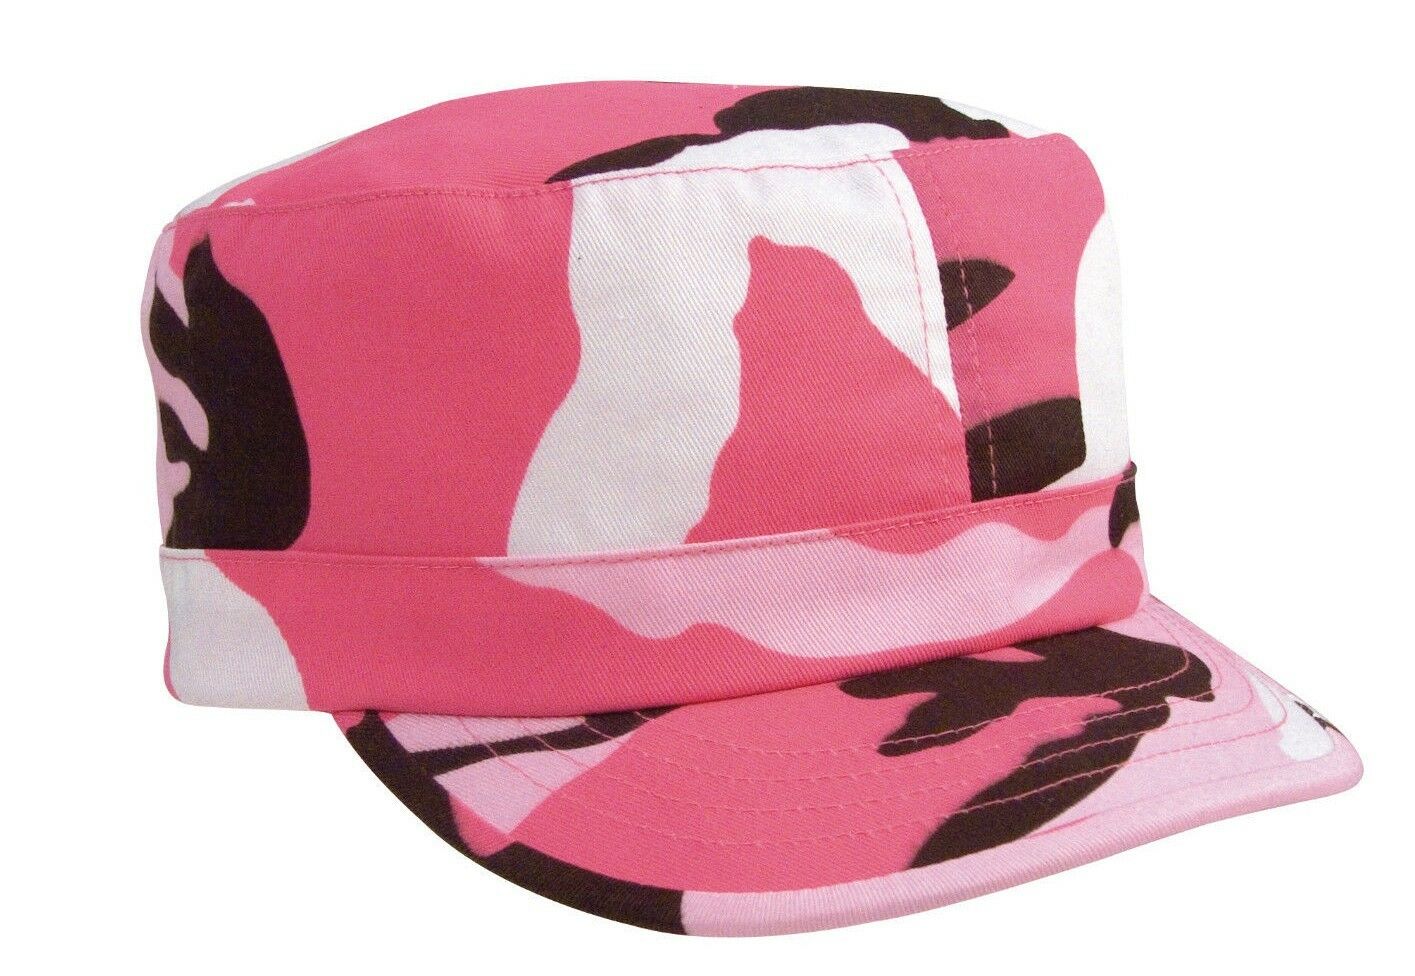 Womens Fatigue Cap Hat Military Style Pink Camo Adjustable Rothco 1152